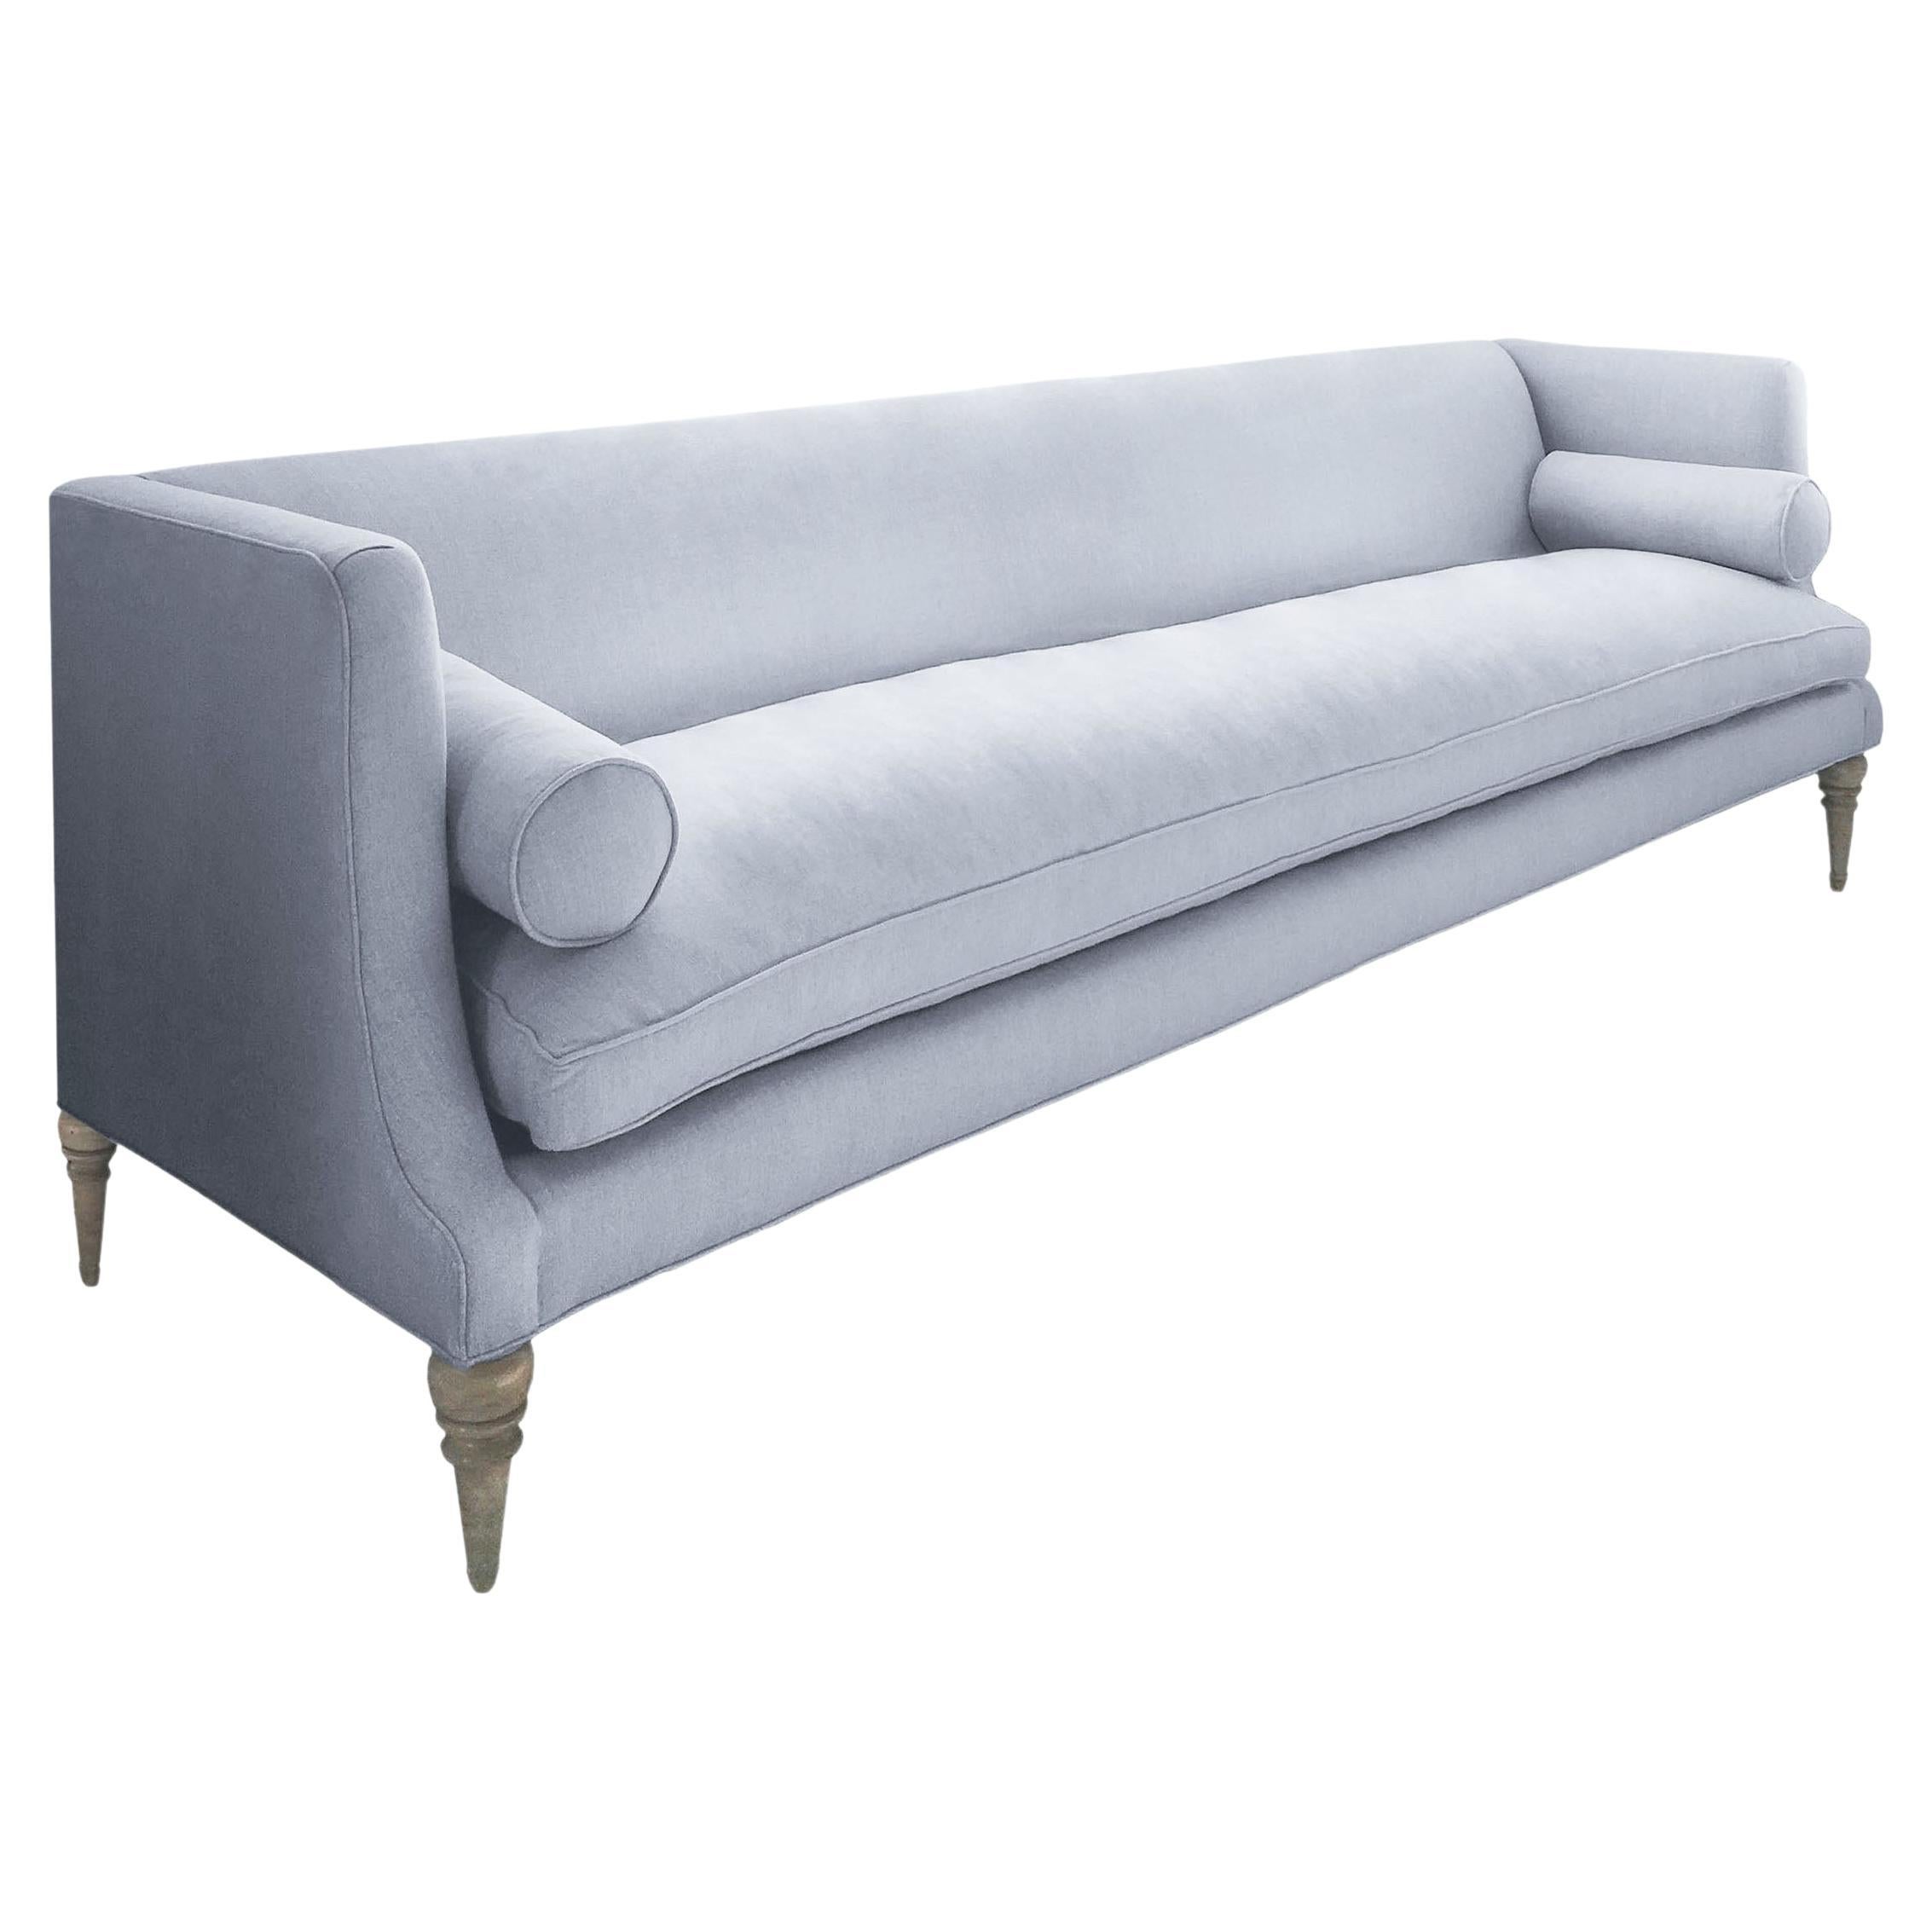 Banquette, Soft Outdoor Gray Fabric, Dining Bench, Settee, Sofa, Handcrafted For Sale